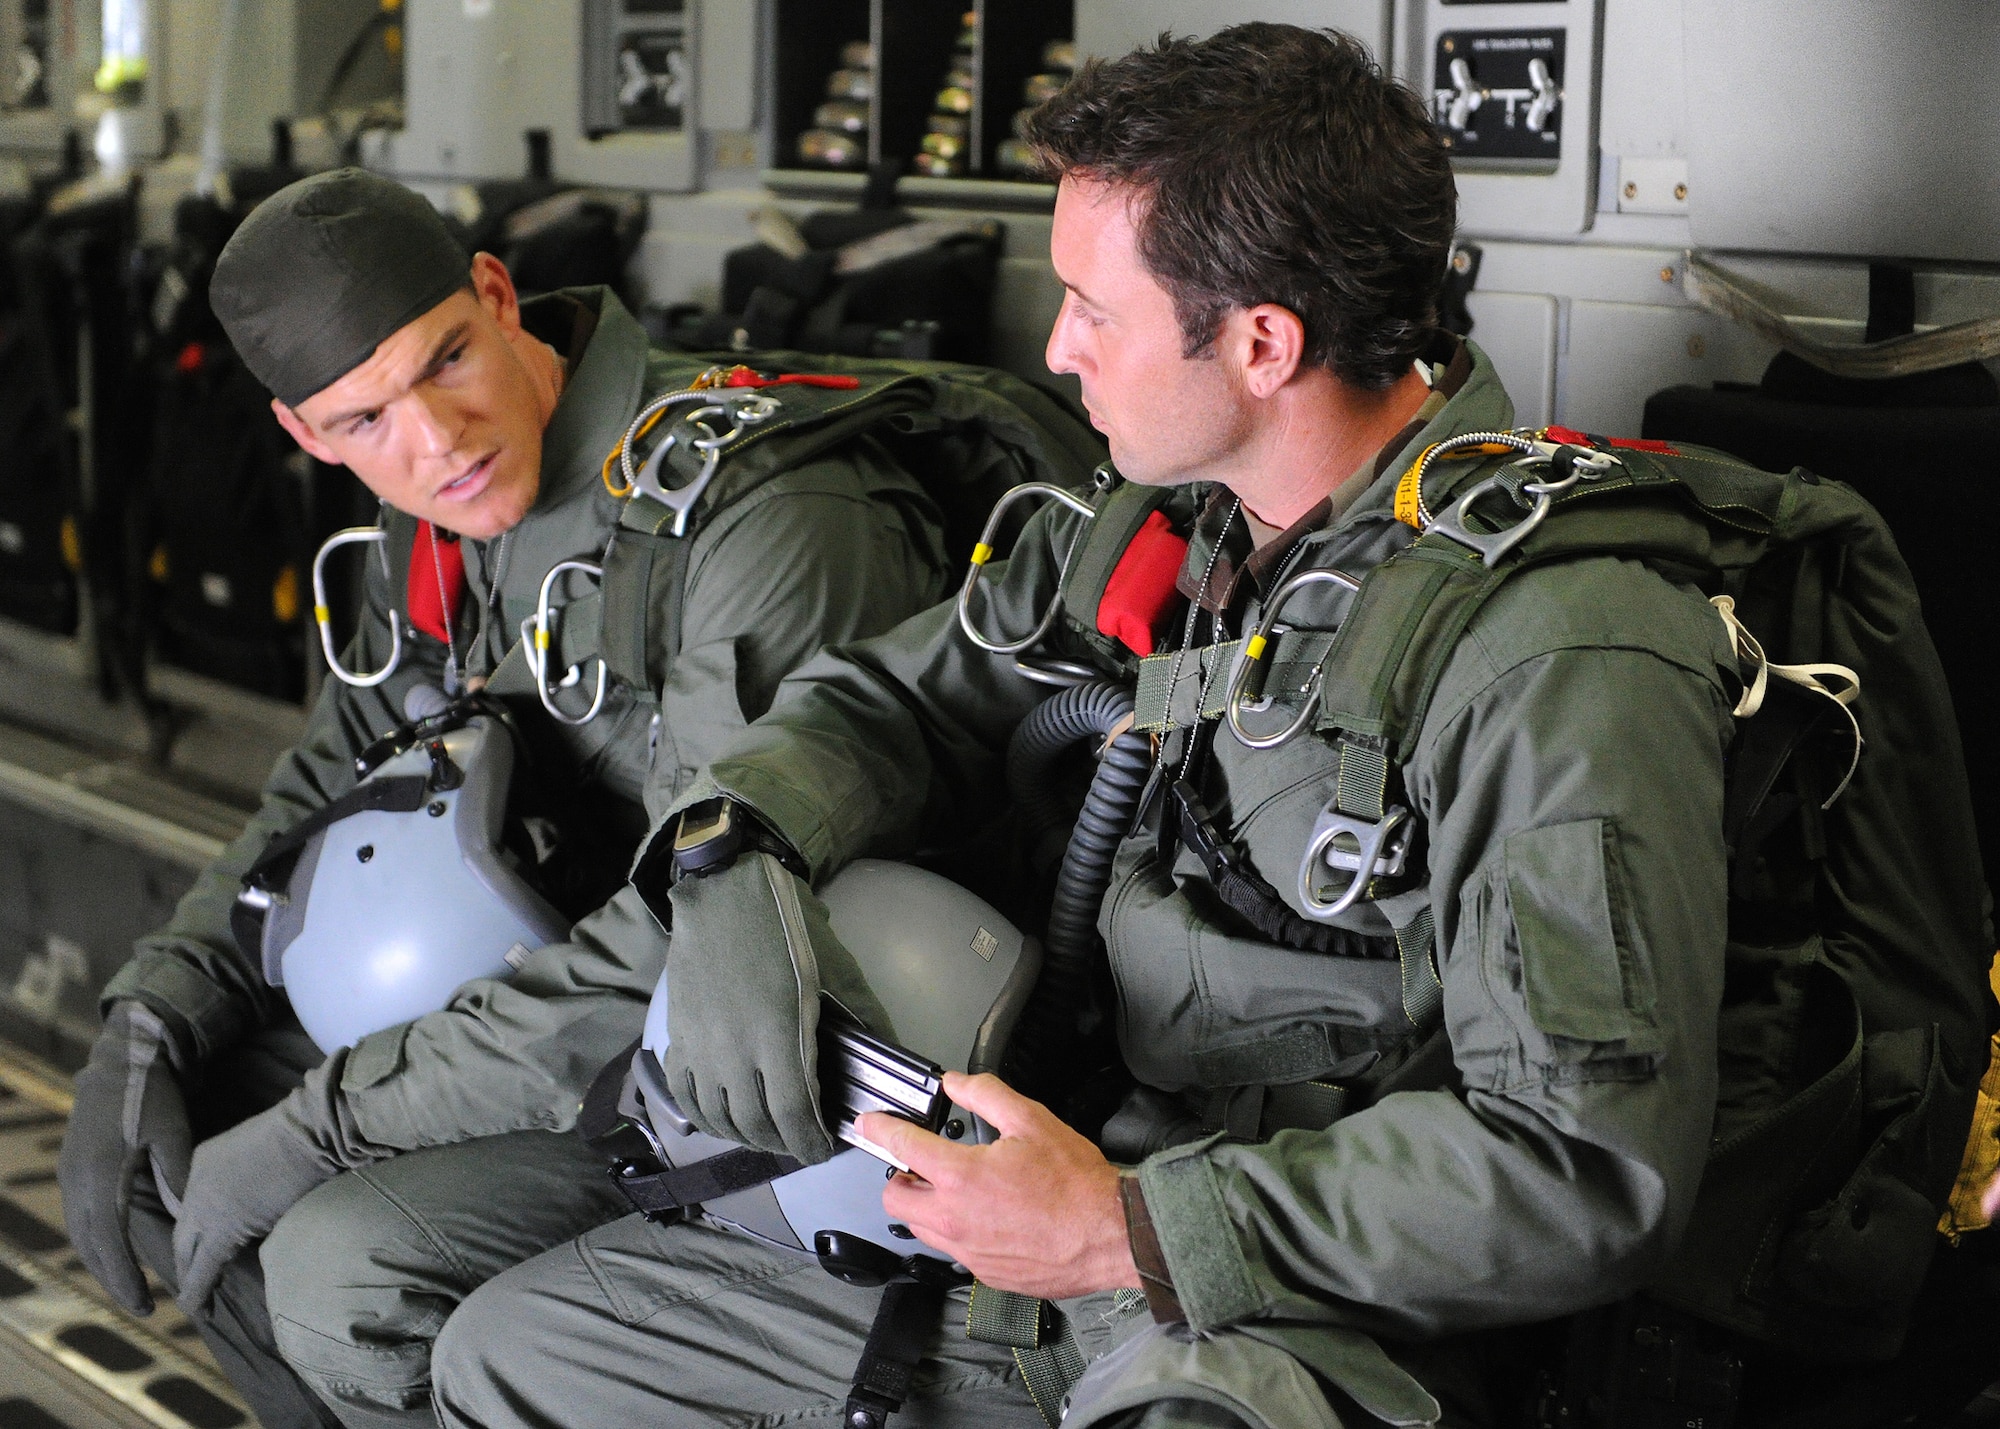 “Hawaii Five-0” actors Alan Ritchson and Alex O’Loughlin (right) go over their lines during a filming scene aboard a C-17 Globemaster at Joint Base Pearl Harbor-Hickam, Feb. 21, 2013.  The crew and cast were on scene to shoot a portion of an upcoming episode. (U.S. Air Force photo/Tech. Sgt. Jerome S. Tayborn) 